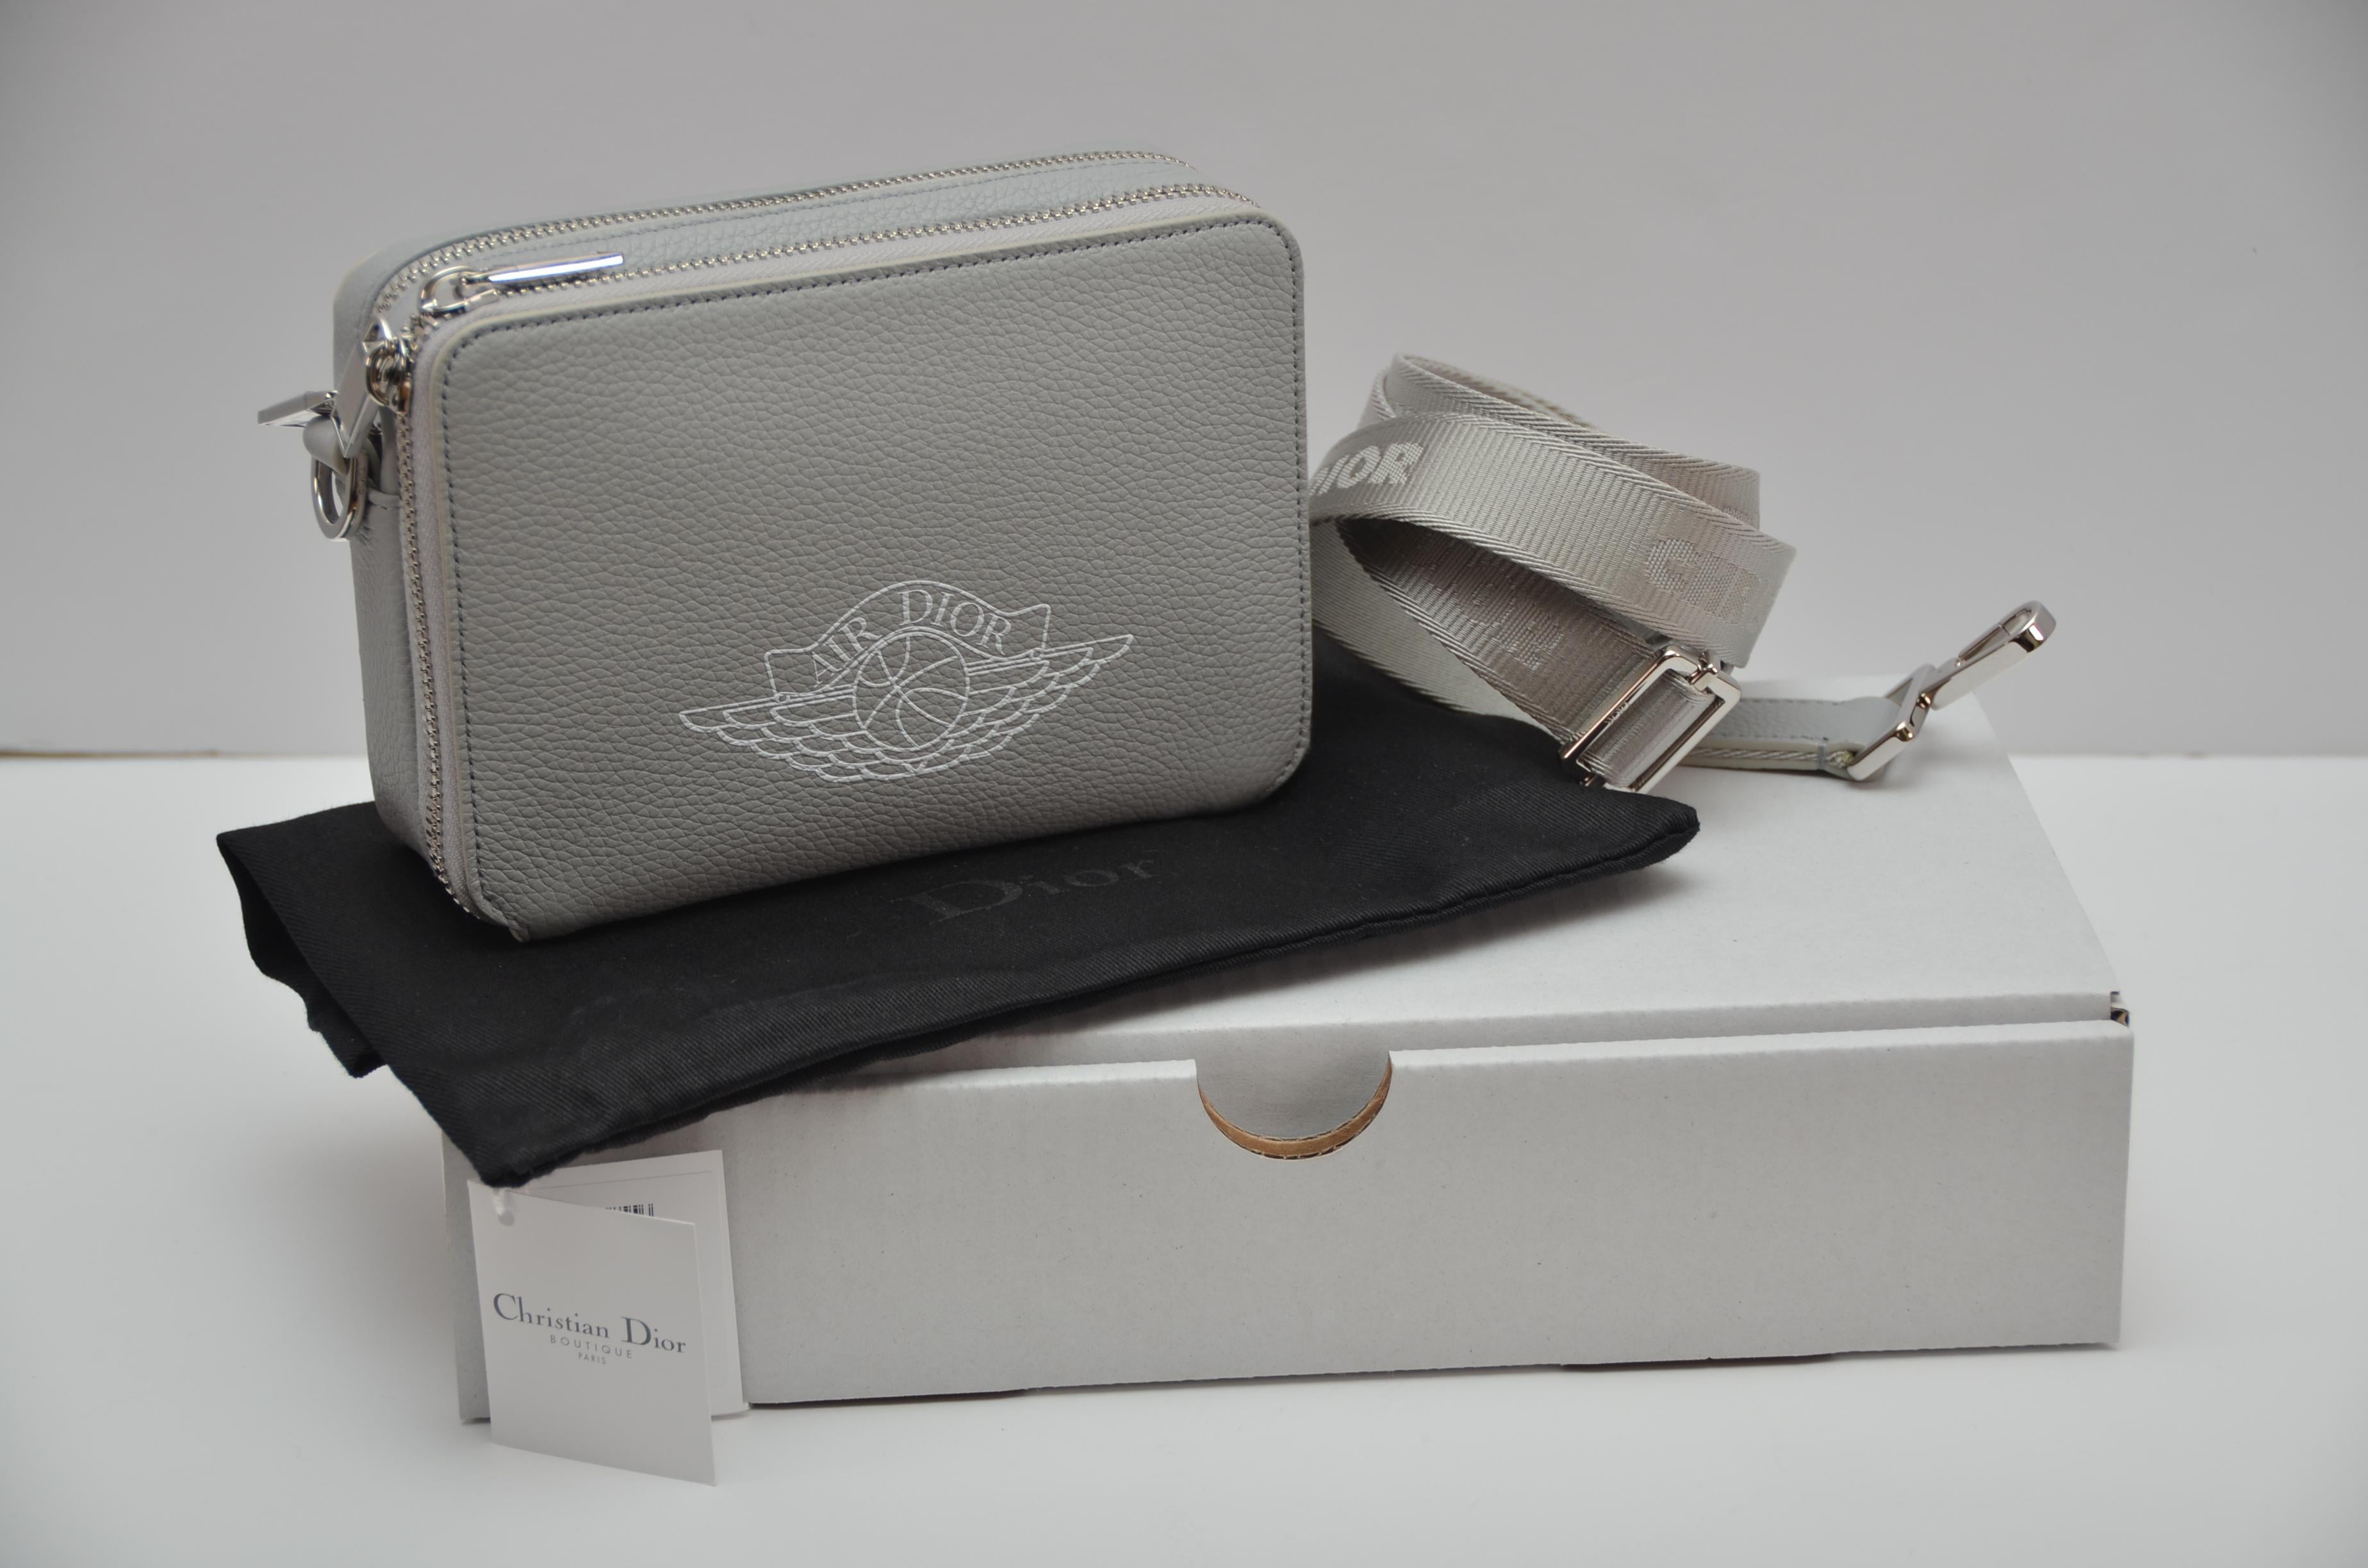 
100% guaranteed authentic 
Dior X Jordan AirDior  Grey  Crossbody Messenger Bag
For the Men’s Fall 2020 Runway show in Miami, Dior and Kim Jones partnered with Jordan Brand to unveil the limited-edition Air Jordan collaboration  

COLOR: light grey